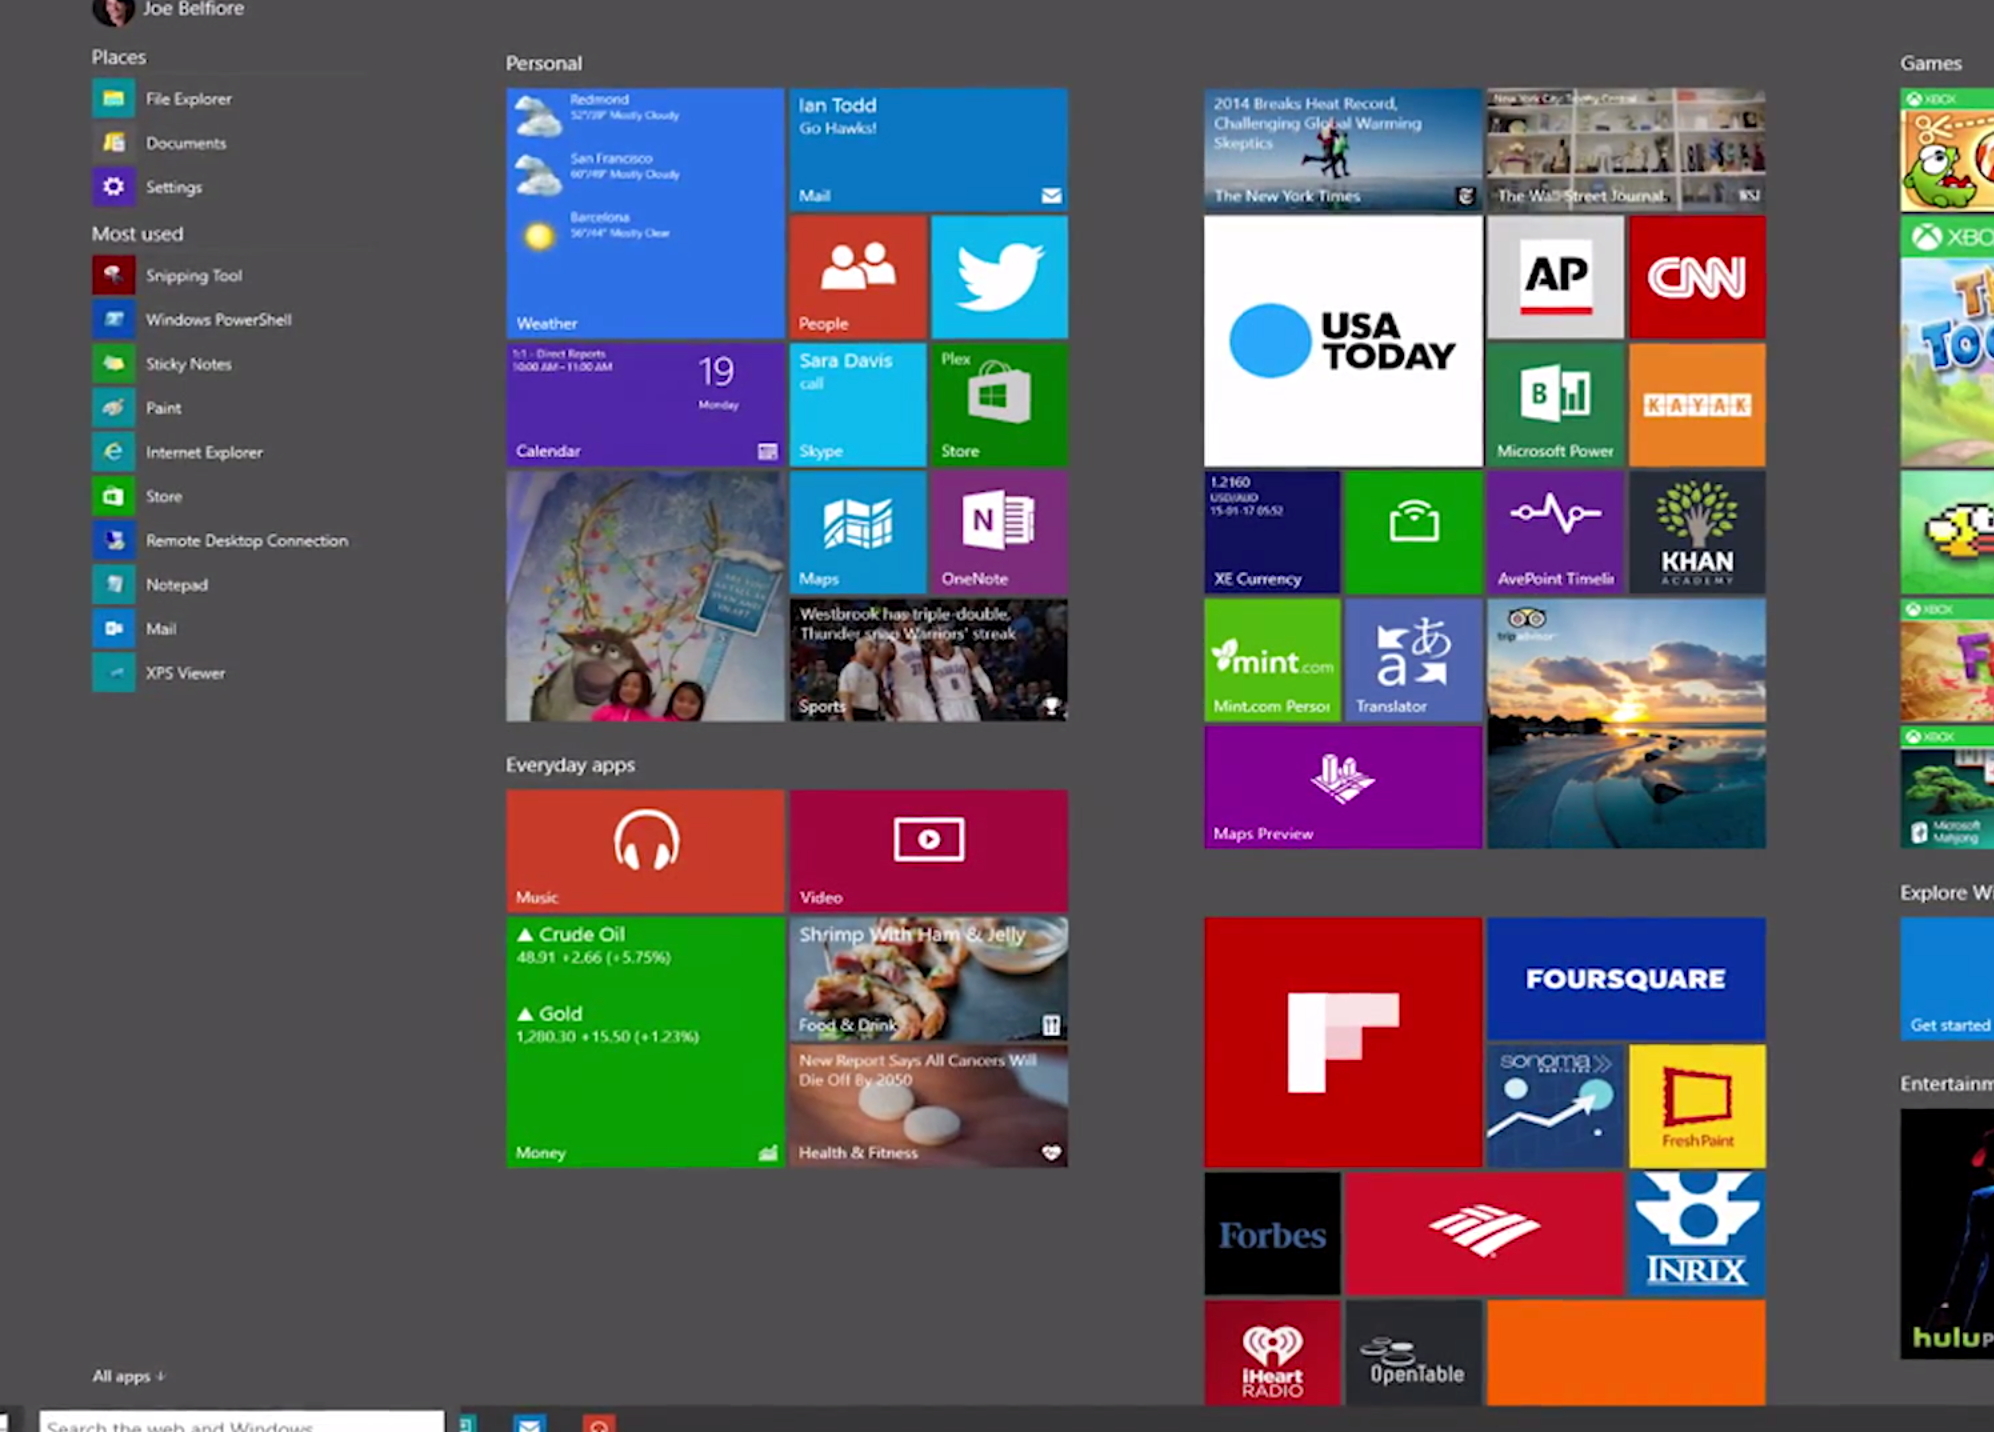 microsoft windows 10 new features cortana universal apps spartan browser and more image 5